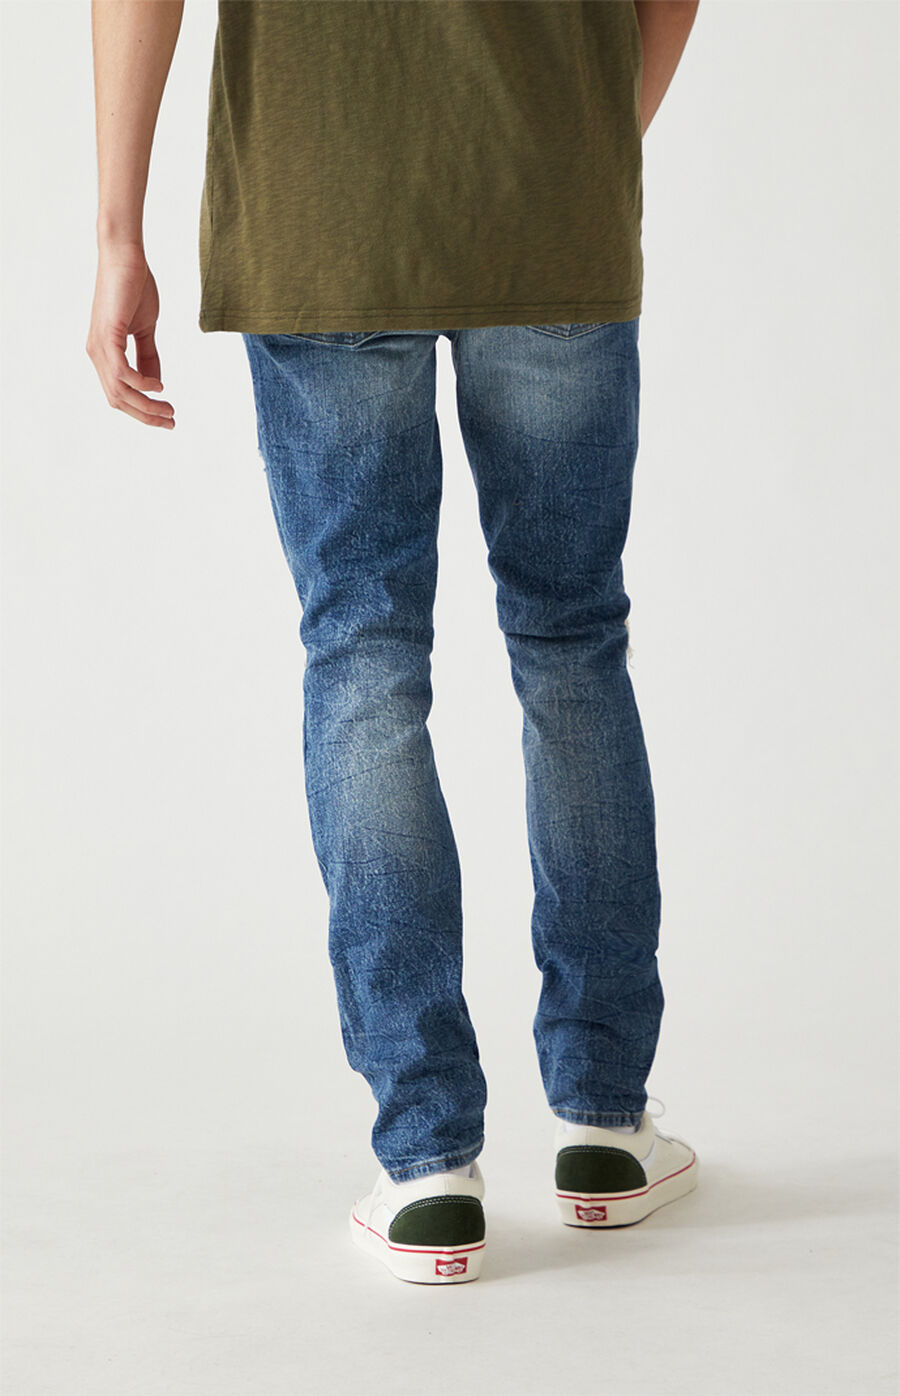 PacSun Medium Ripped Stacked Skinny Jeans | PacSun